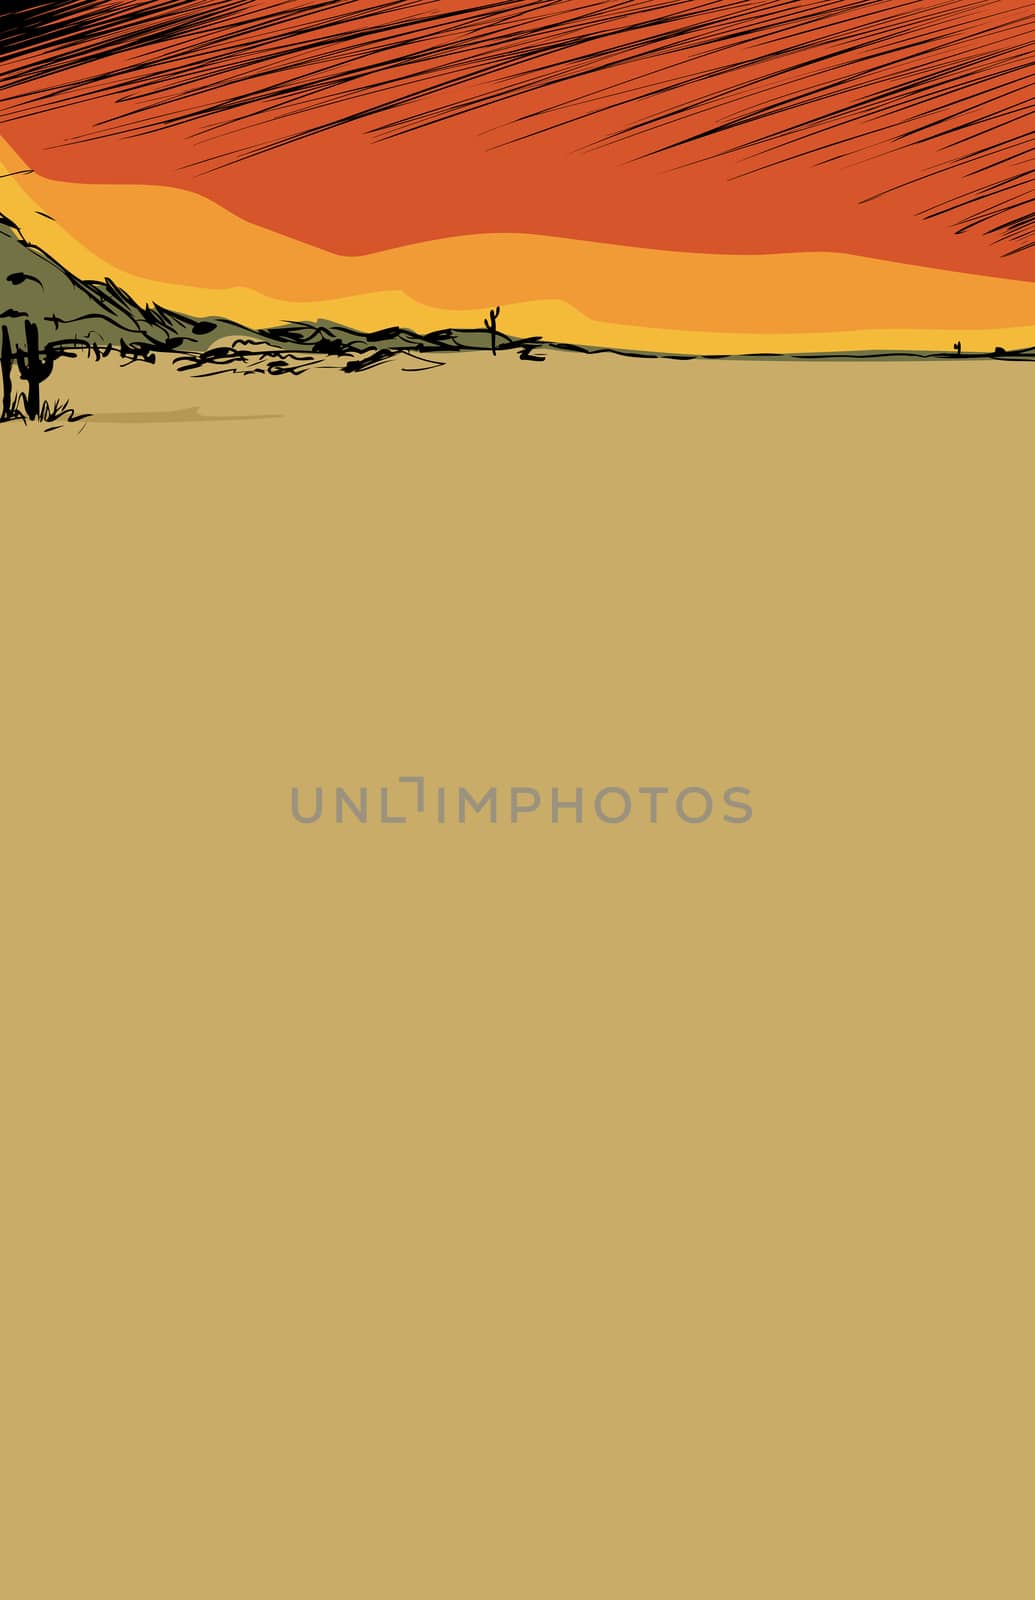 Empty nature background illustration of desert with cactus and hills